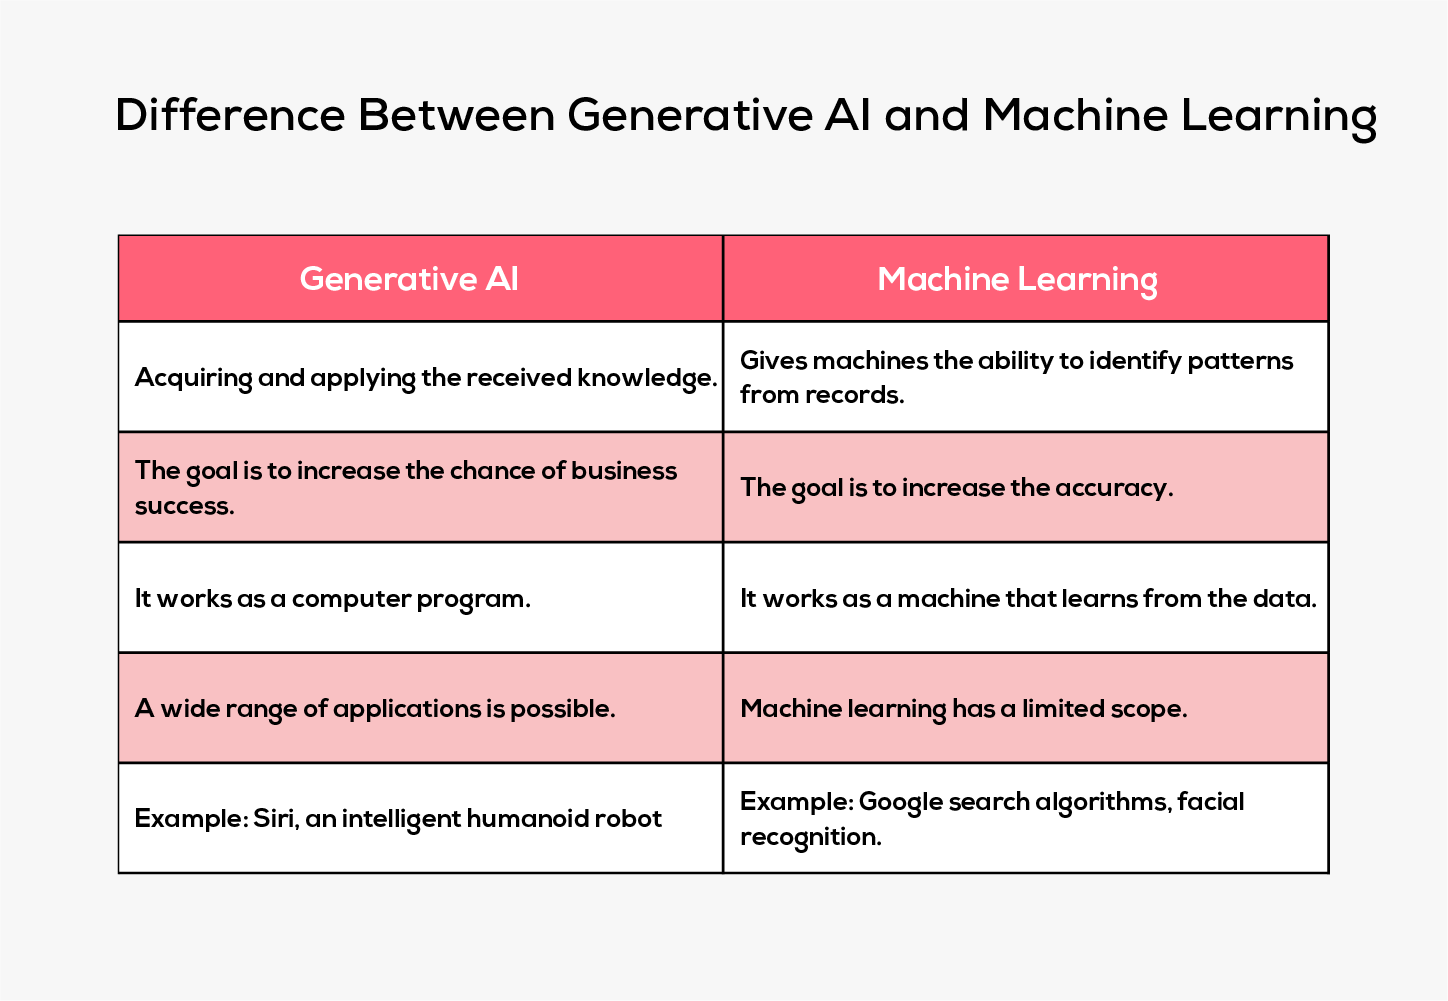 Difference Between Generative AI and Machine Learning